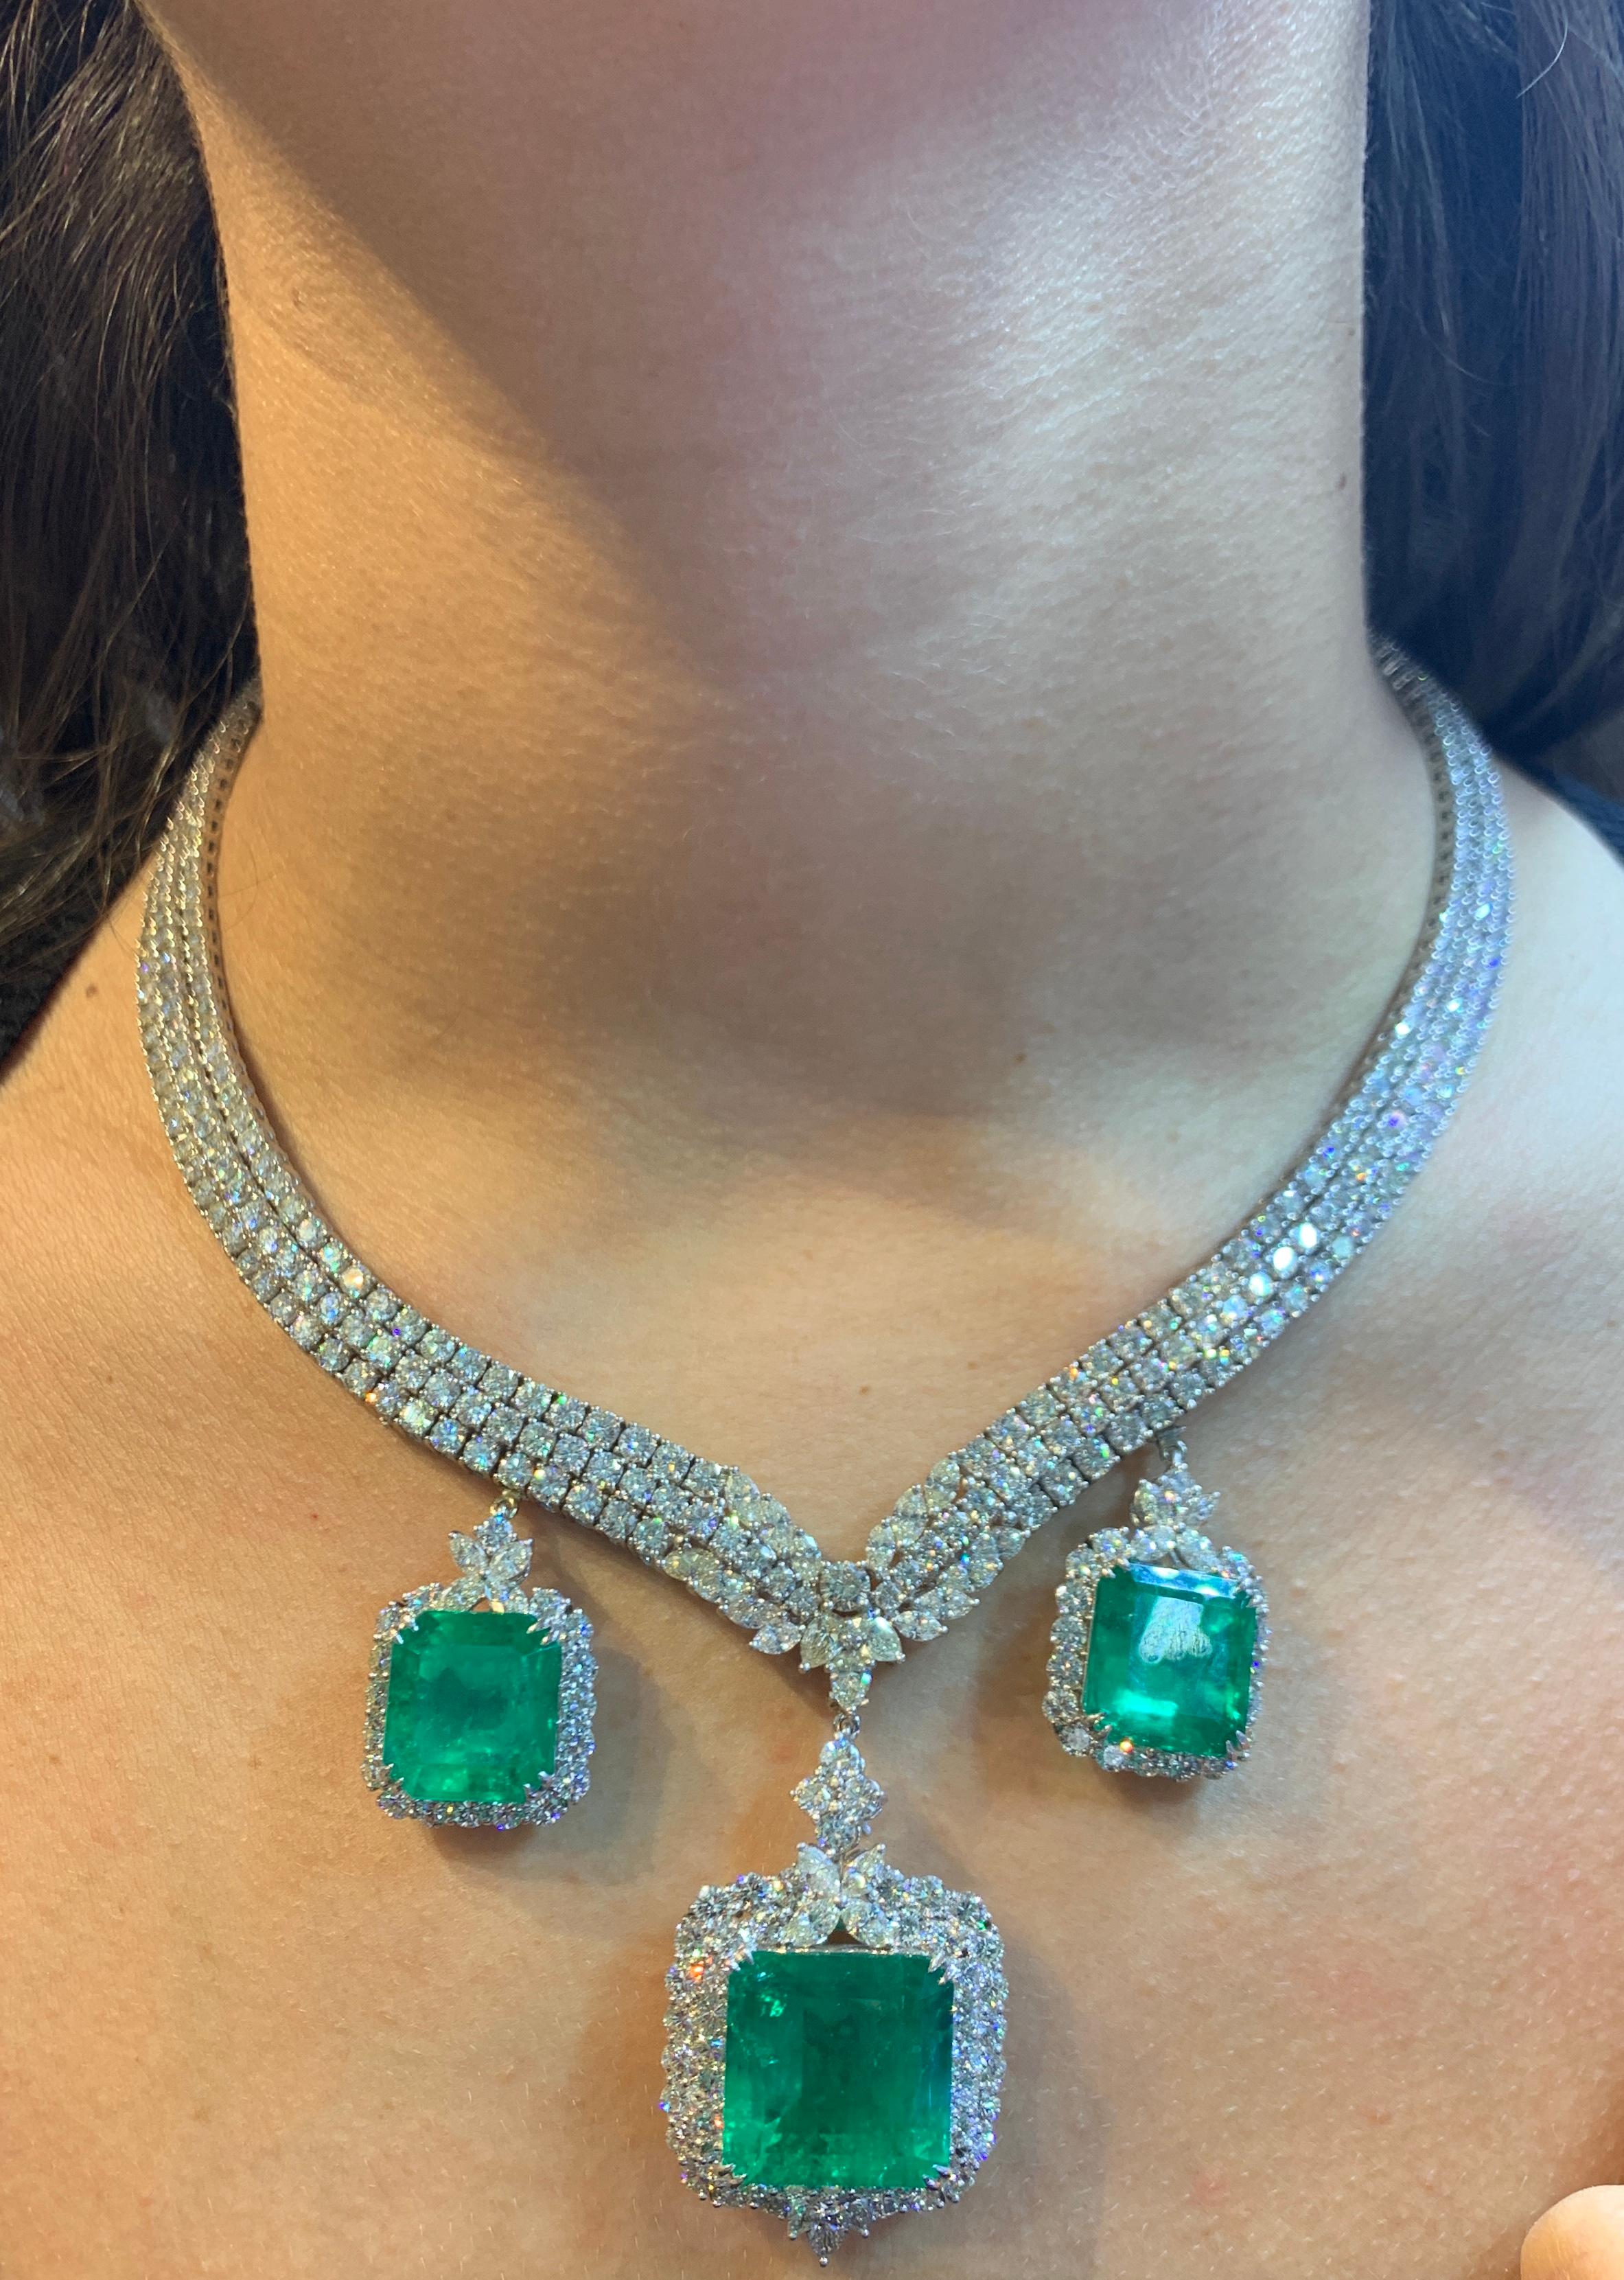 Important Certified Colombian Emerald And Diamond Necklace
Removable emerald drops.
AGL Laboratory Certified Colombian Emerald Weight: 59.56 Cts 
18 Karat white gold
